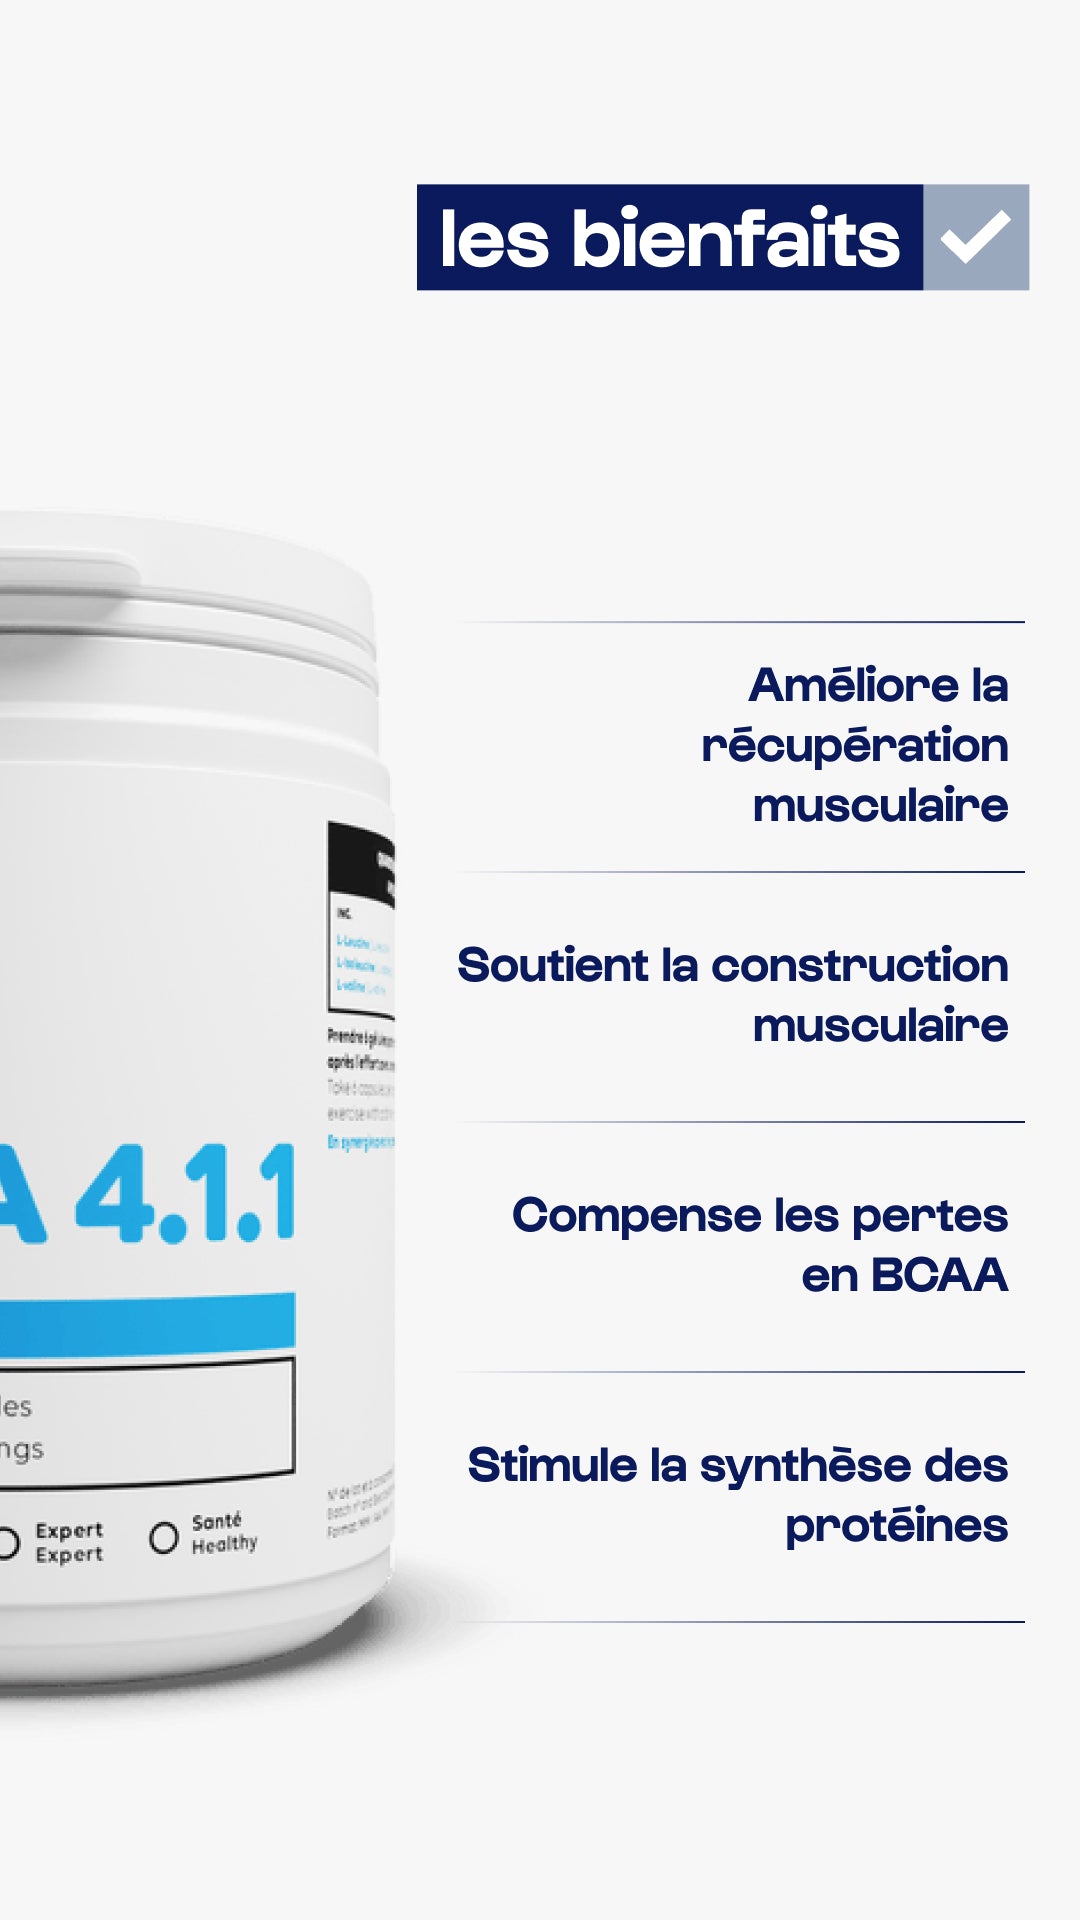 BCAA 4.1.1 Manufacturers in capsules